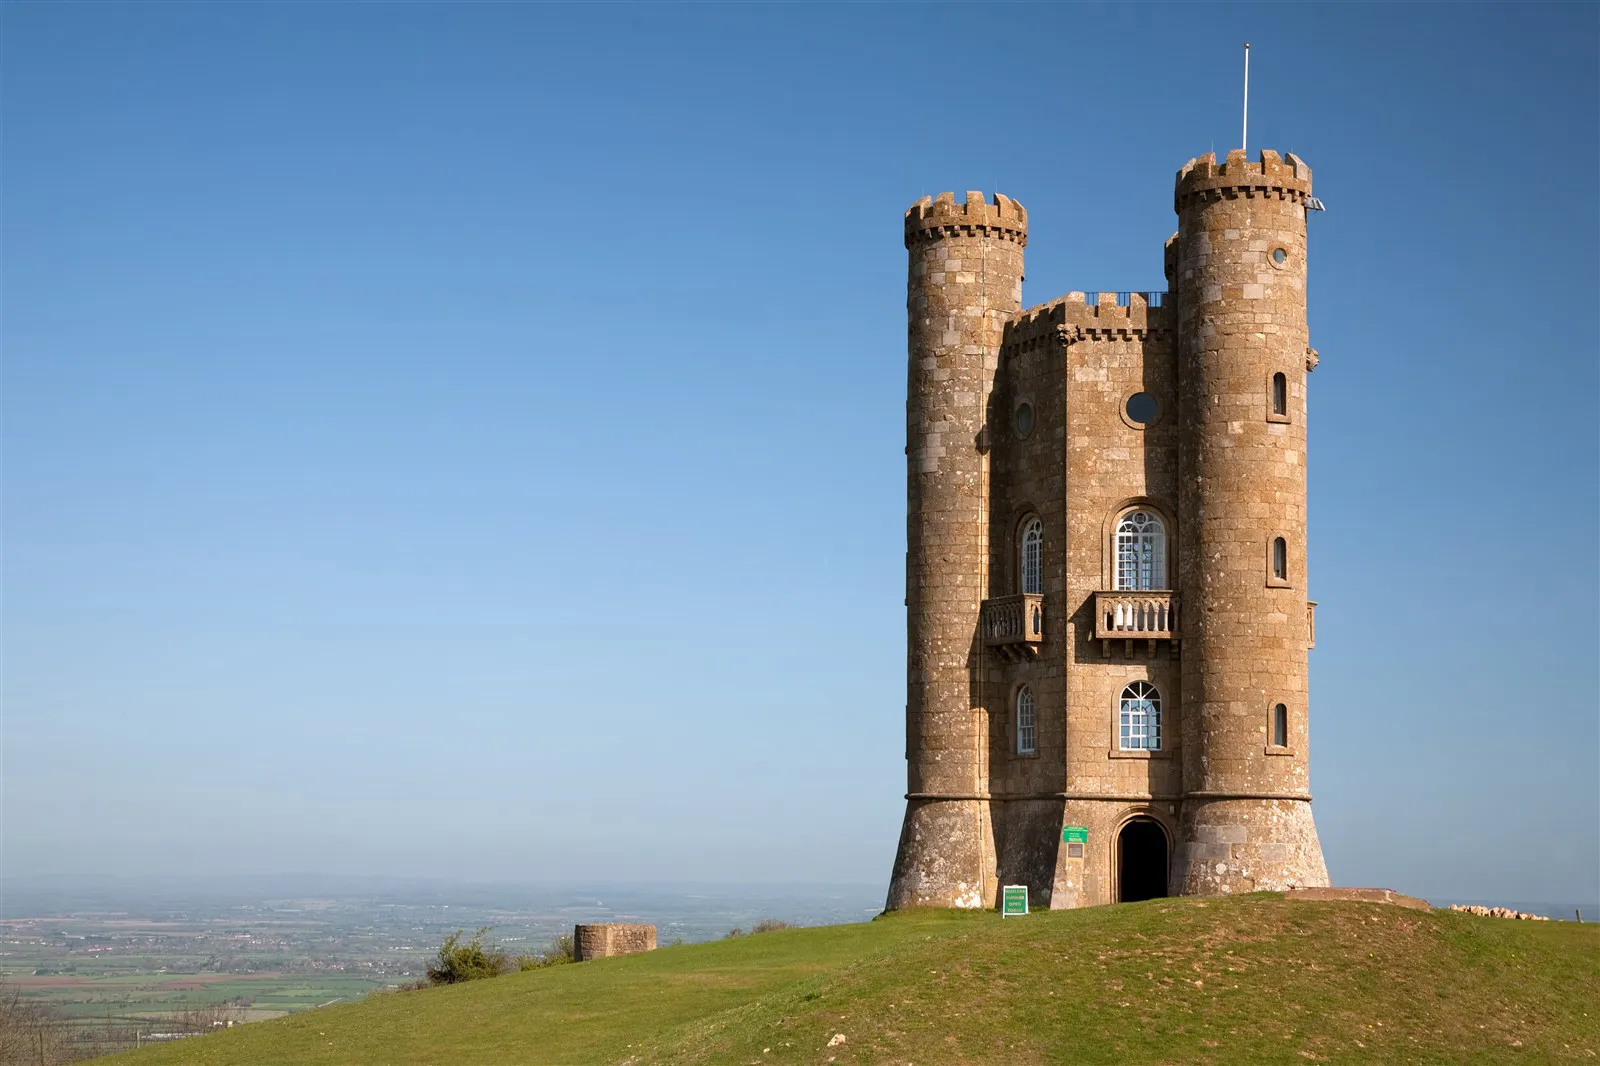 Broadway Tower in the Cotswolds